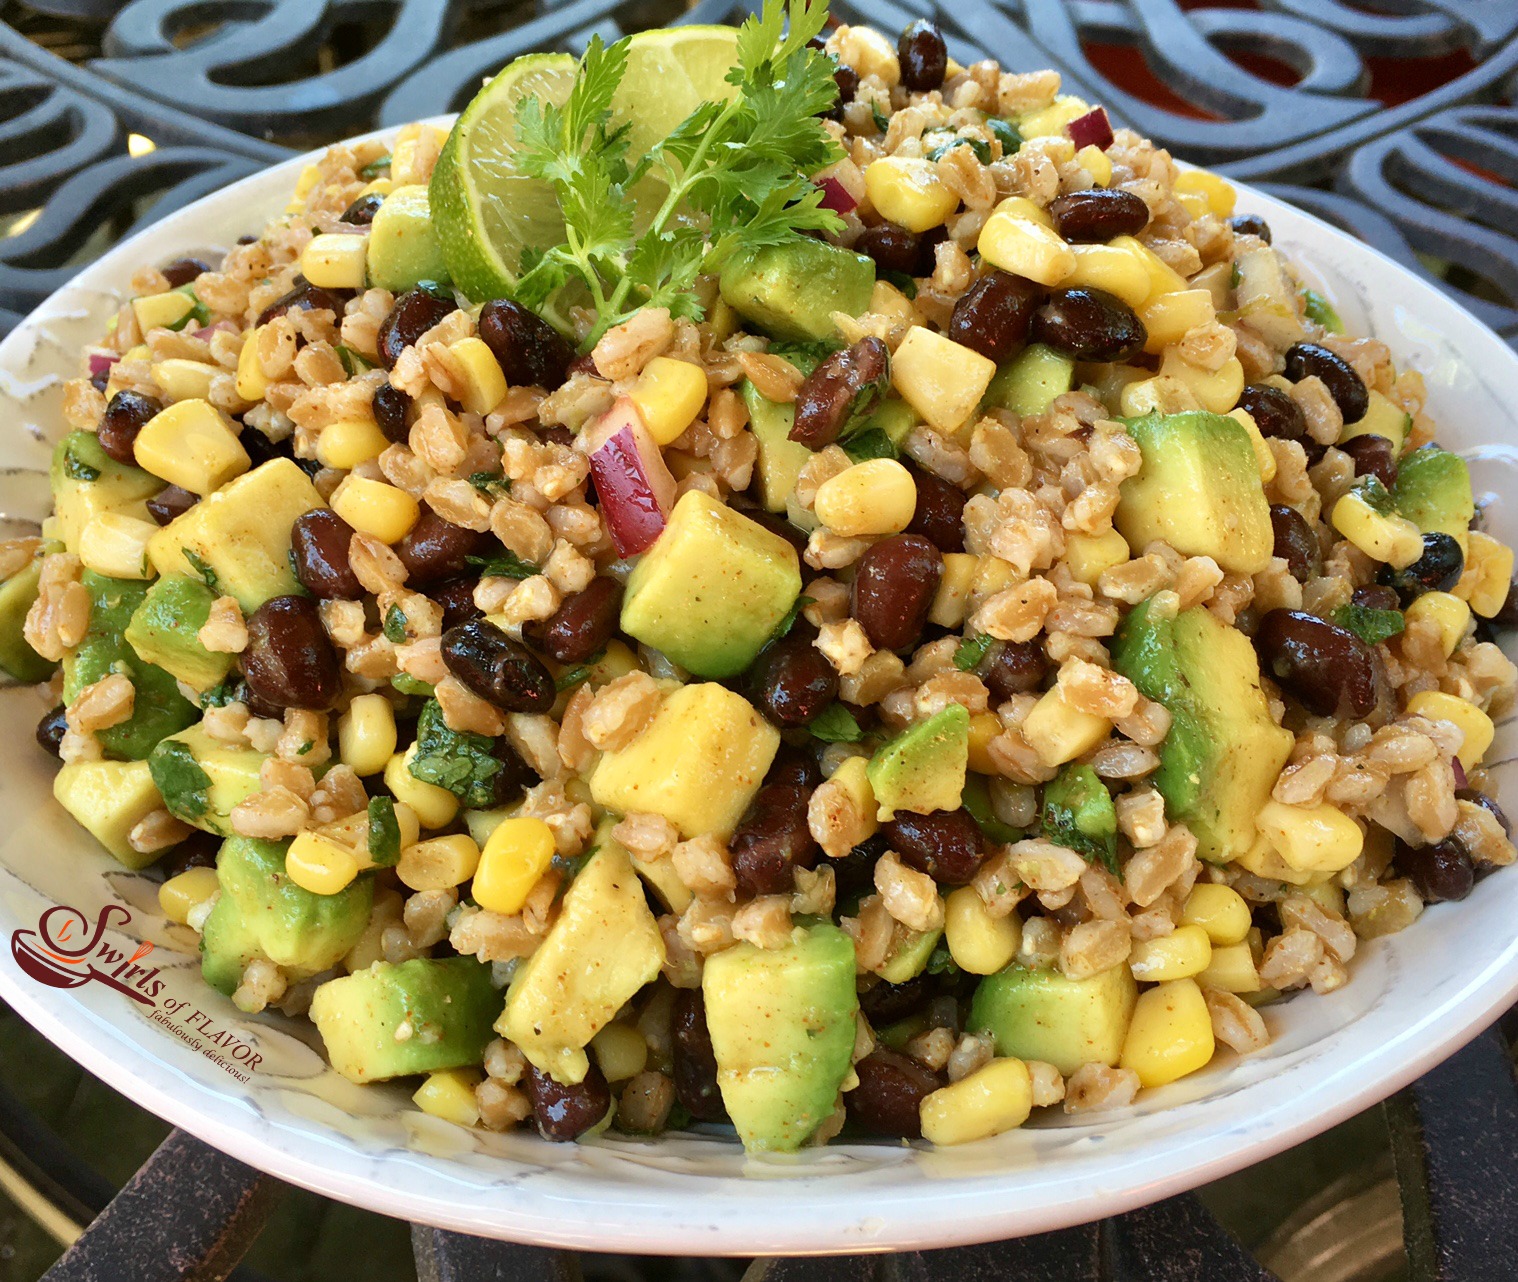 A chili lime vinaigrette, the creamy goodness of avocado, protein-rich black beans and fresh corn make Chili Lime Black Bean Corn Farro Salad the perfect addition to your alfresco table this summer! salad | avocado | black beans | corn on the cob | farro | grains